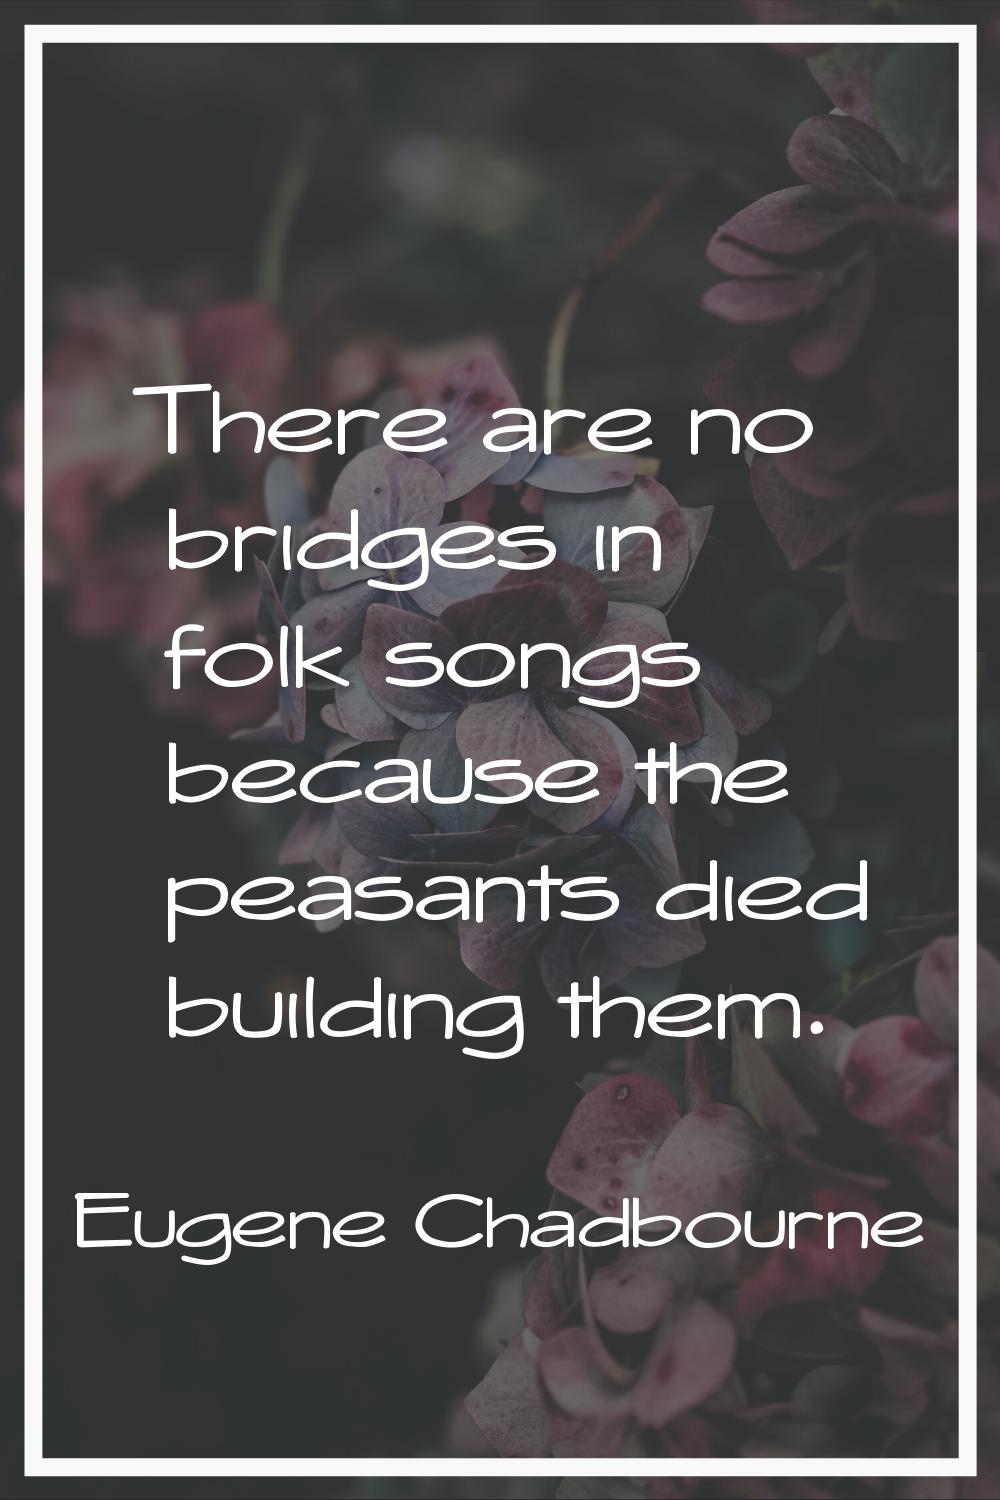 There are no bridges in folk songs because the peasants died building them.